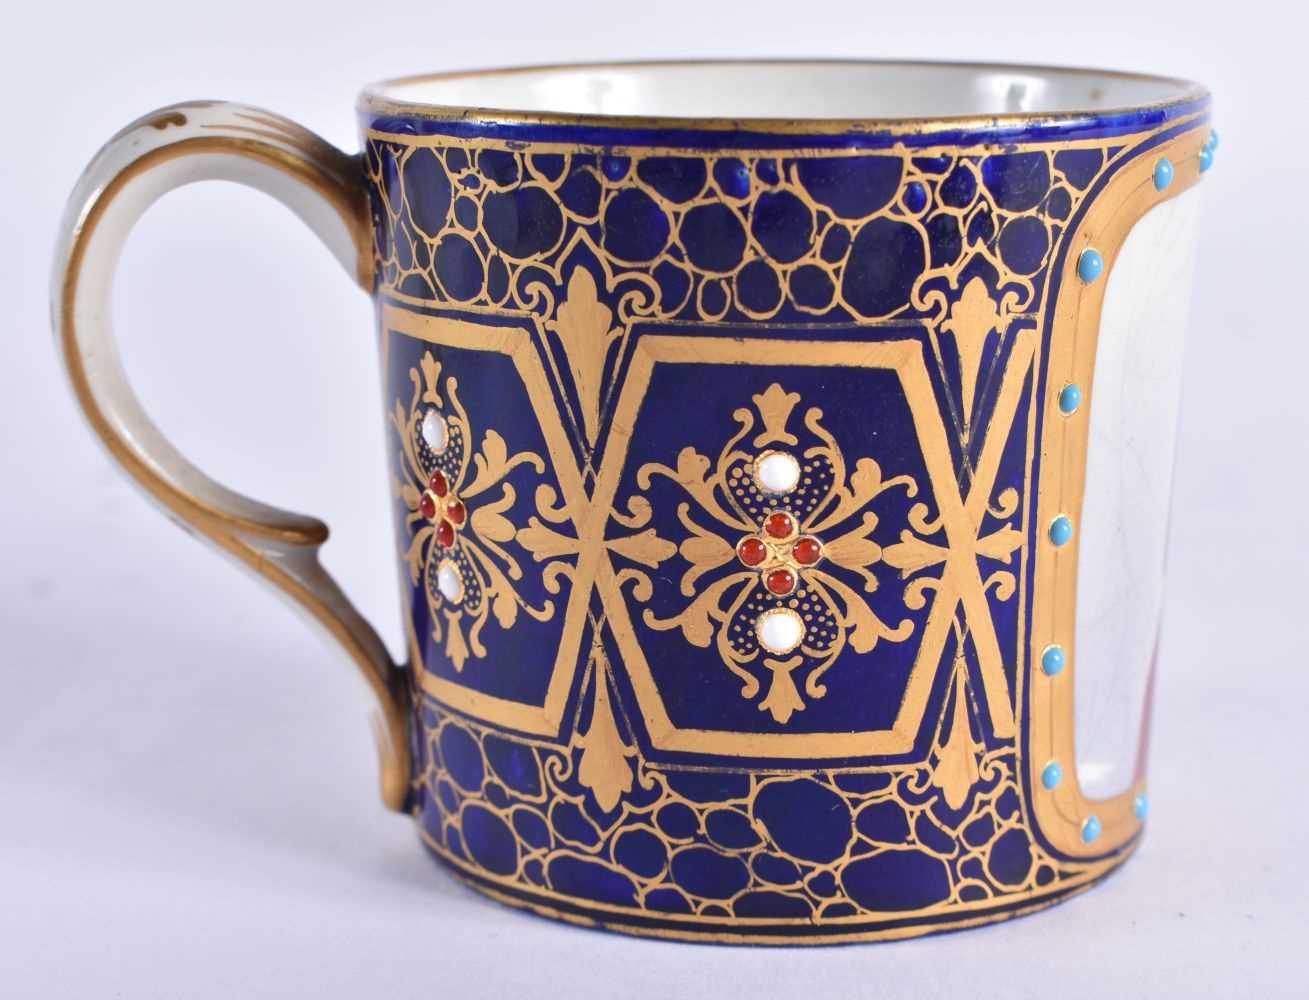 AN EARLY 19TH CENTURY FRENCH SEVRES JEWELLED PORCELAIN CABINET CUP AND SAUCER painted with a - Image 5 of 8